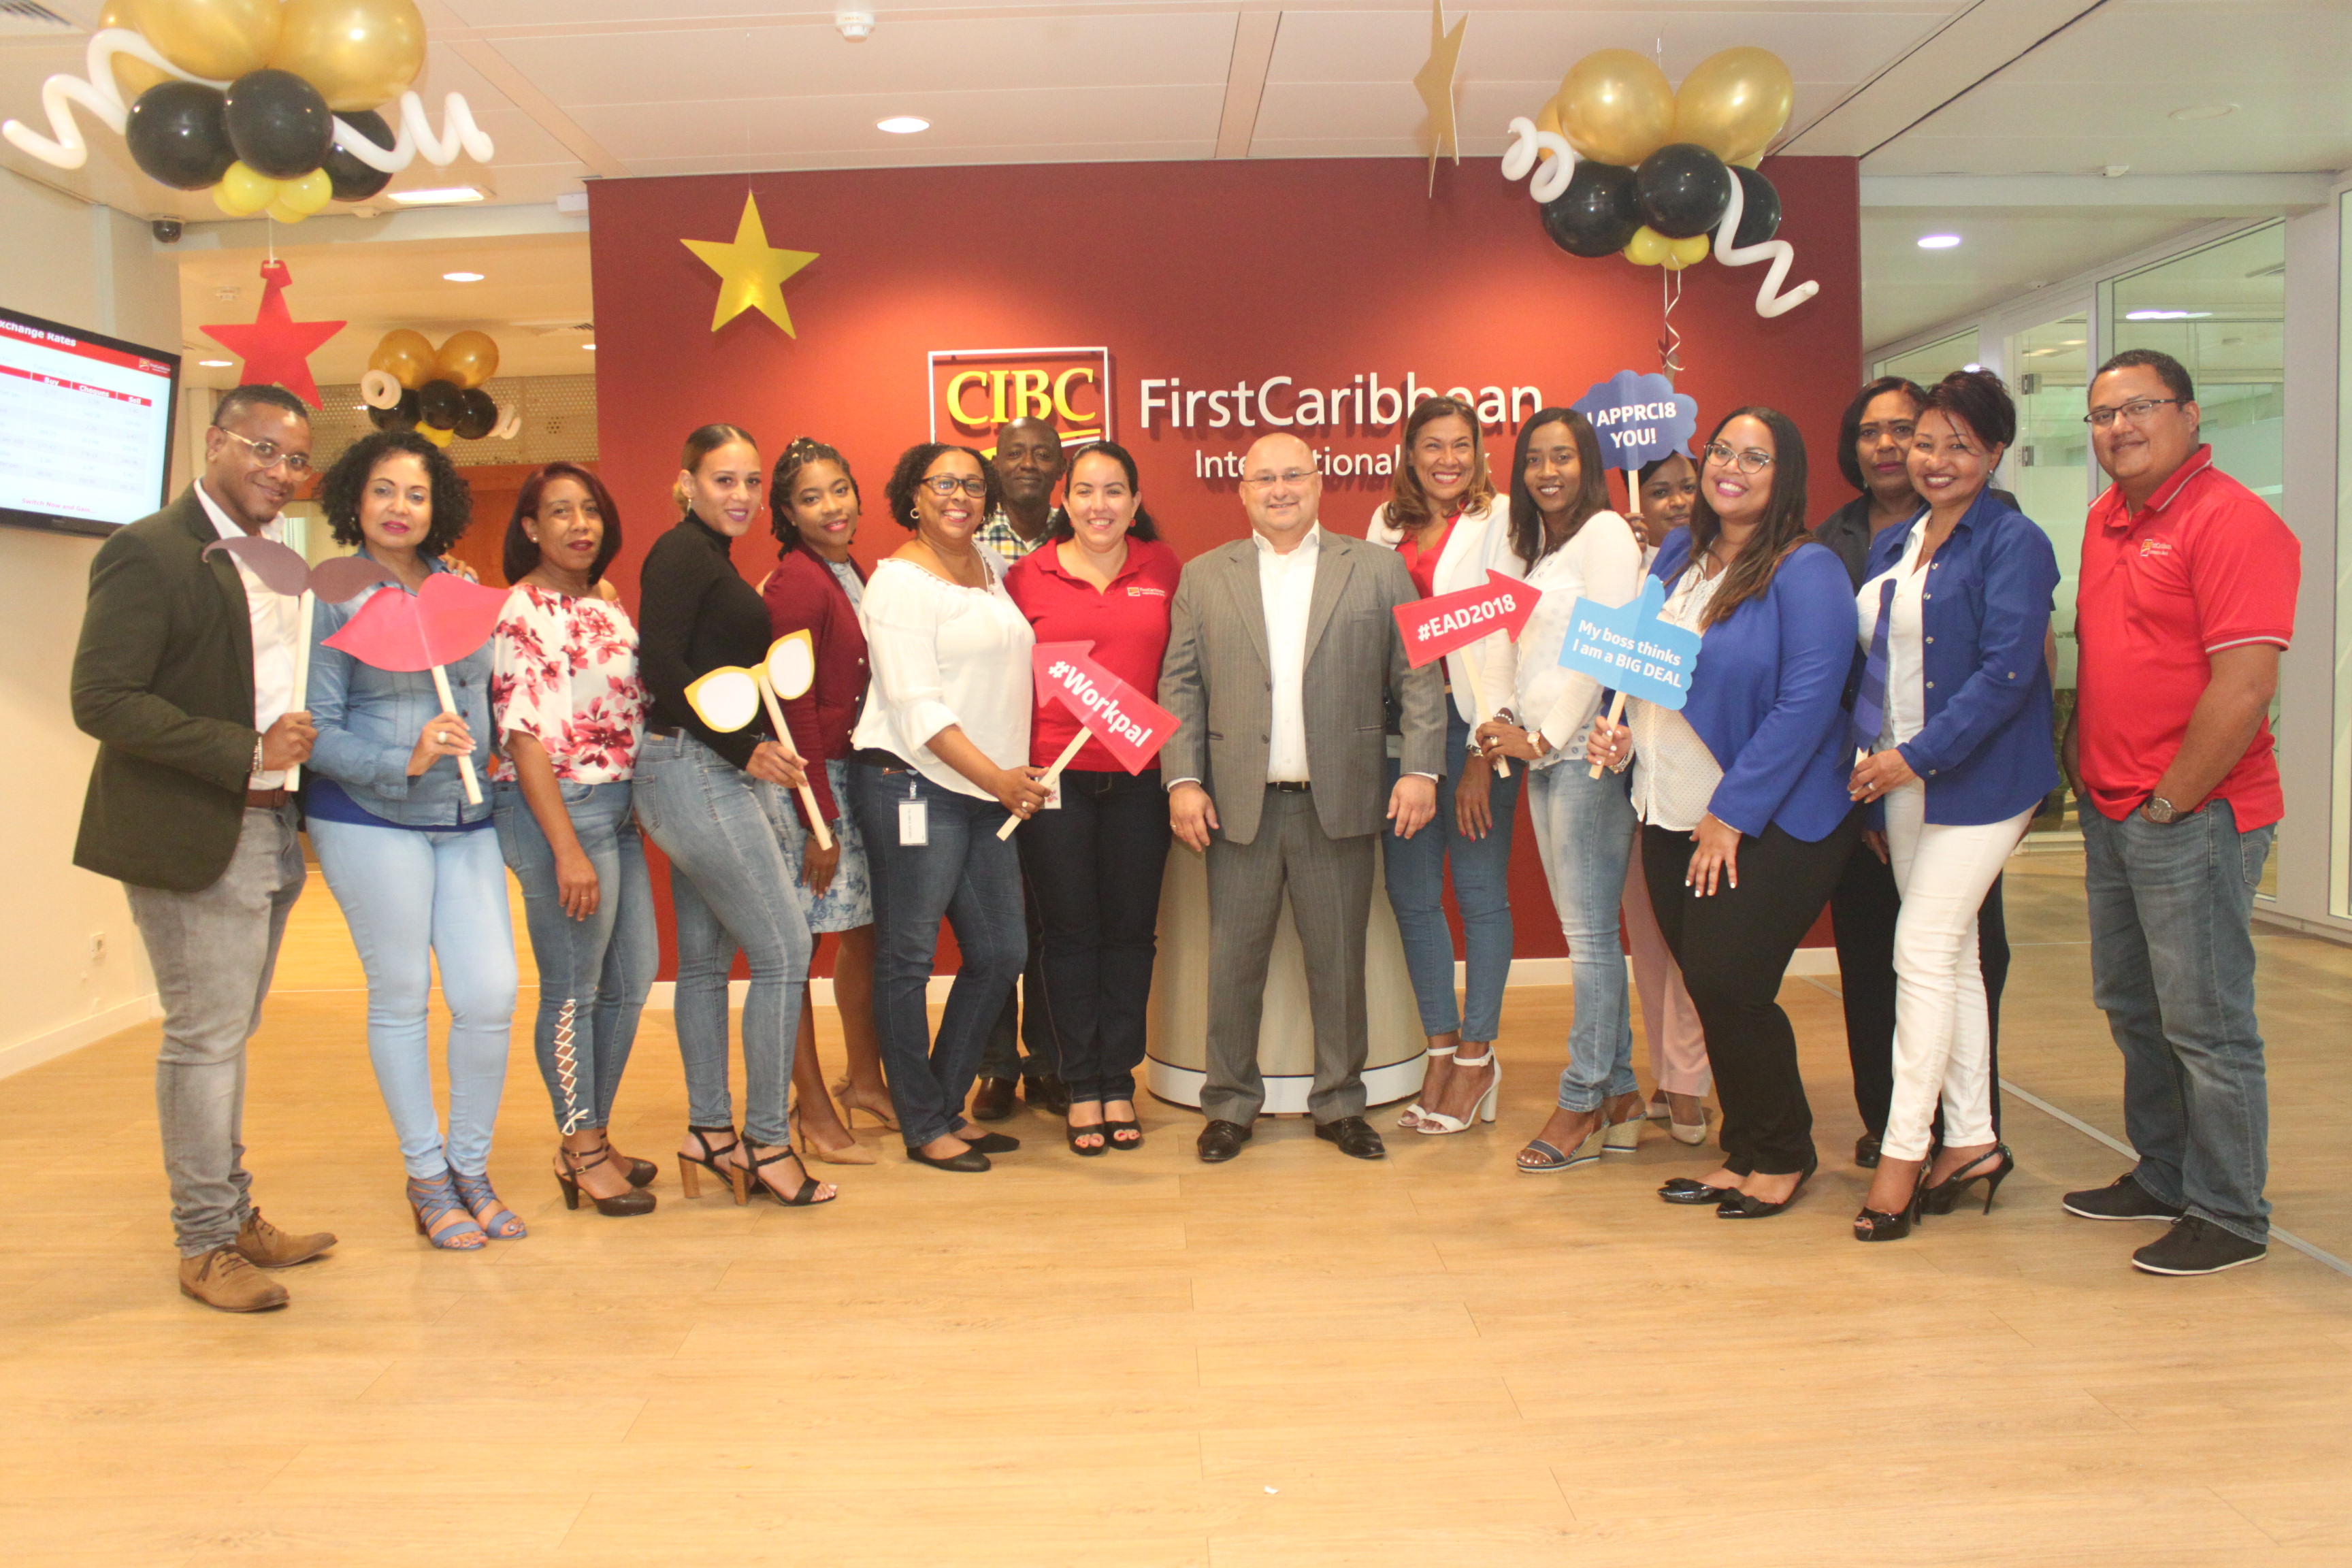 CIBC FirstCaribbean International Bank toasts its employees during